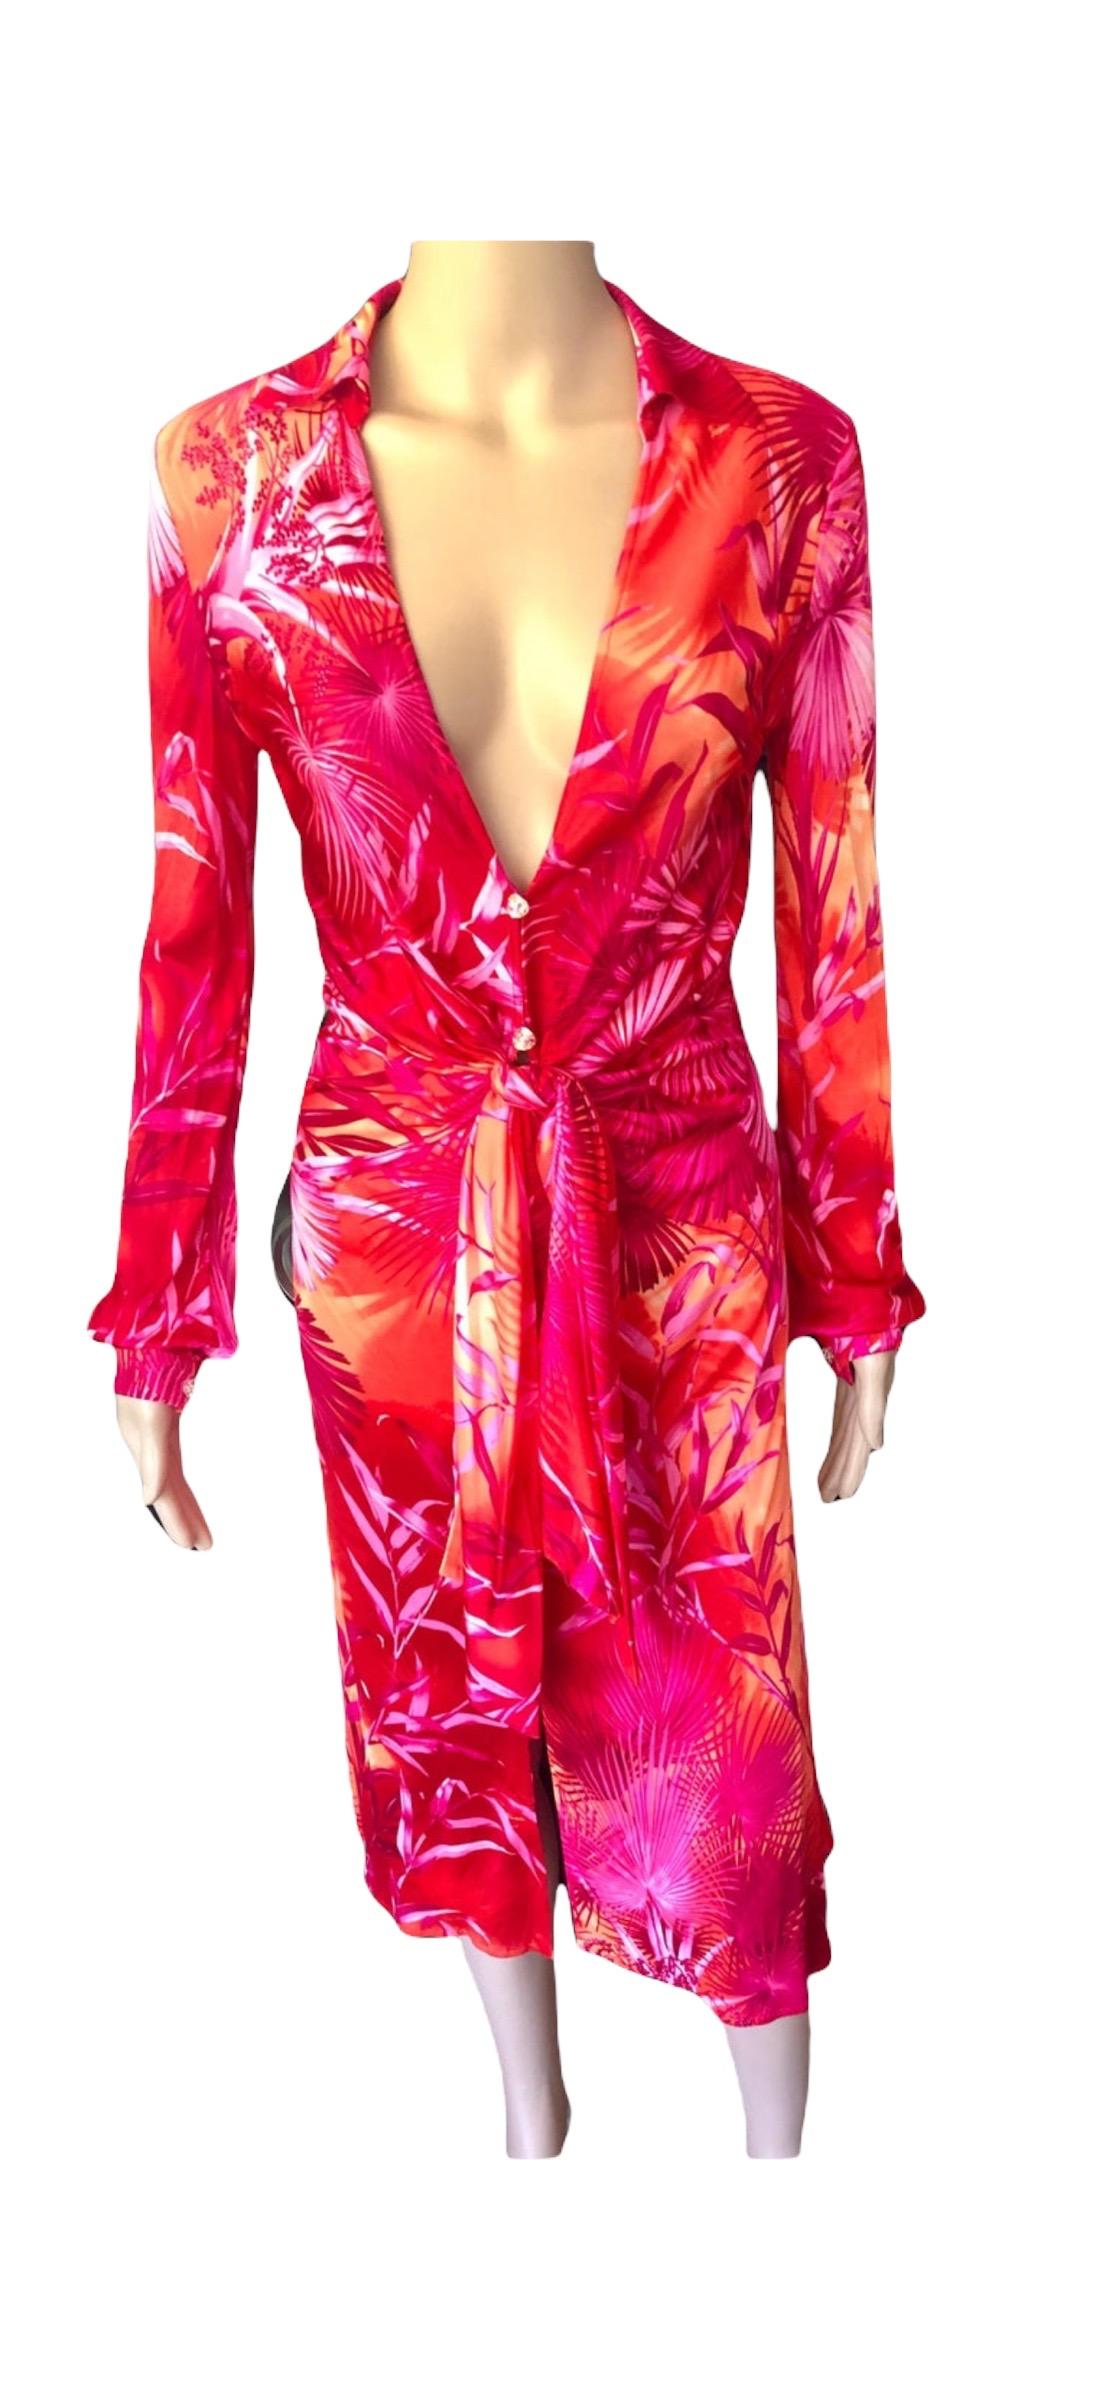 Gianni Versace Runway S/S 2000 Vintage Tropical Print Plunging Neckline Dress For Sale 6